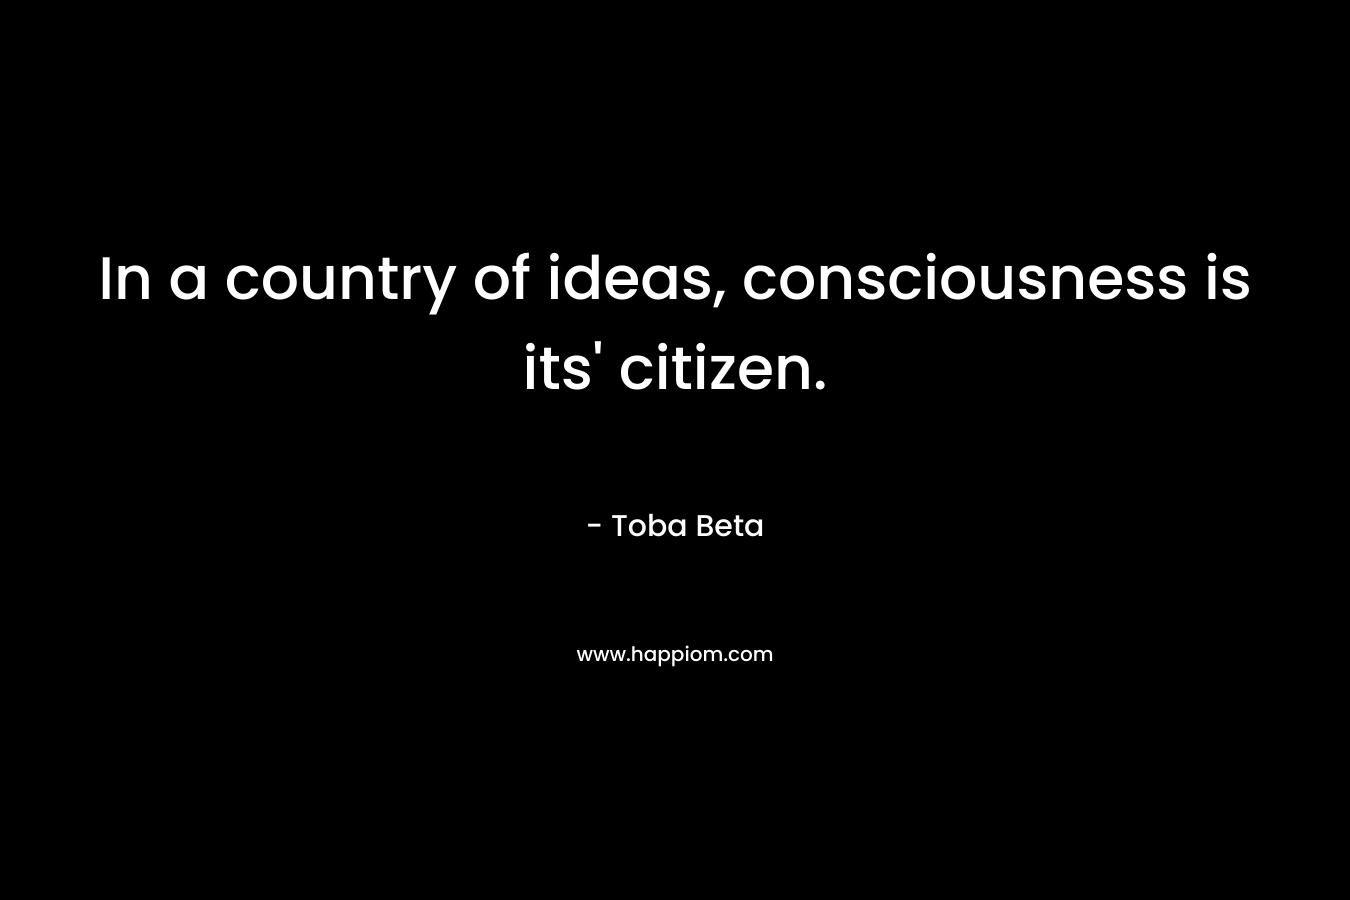 In a country of ideas, consciousness is its' citizen.